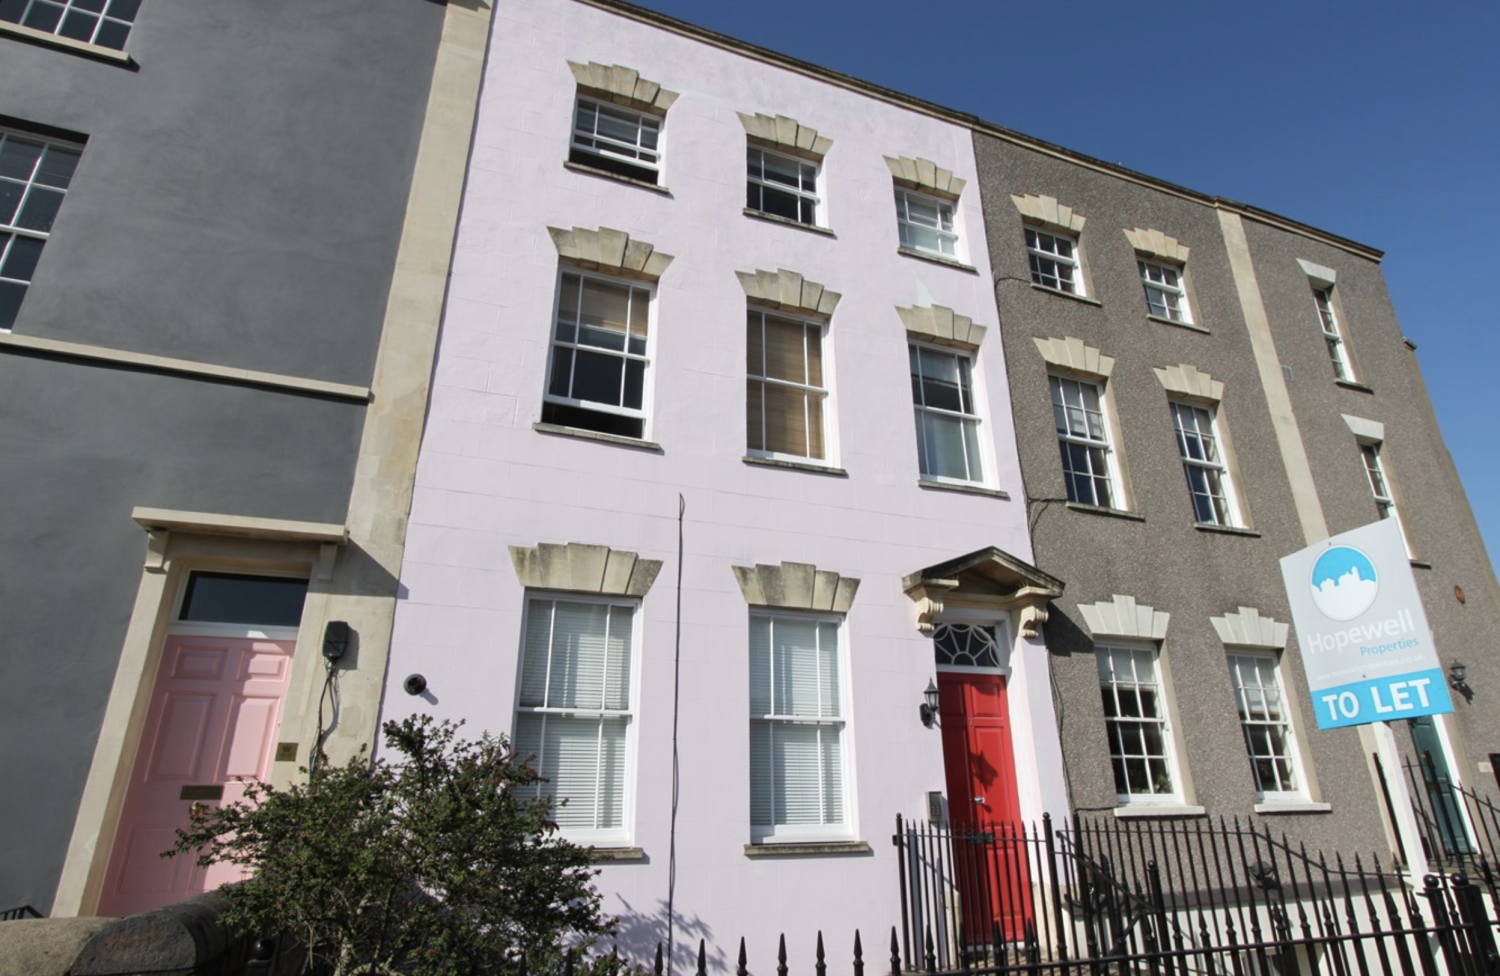 Bristol terraced townhouse with a bright red front door, pale pink exterior paintwork and Georgian style windows